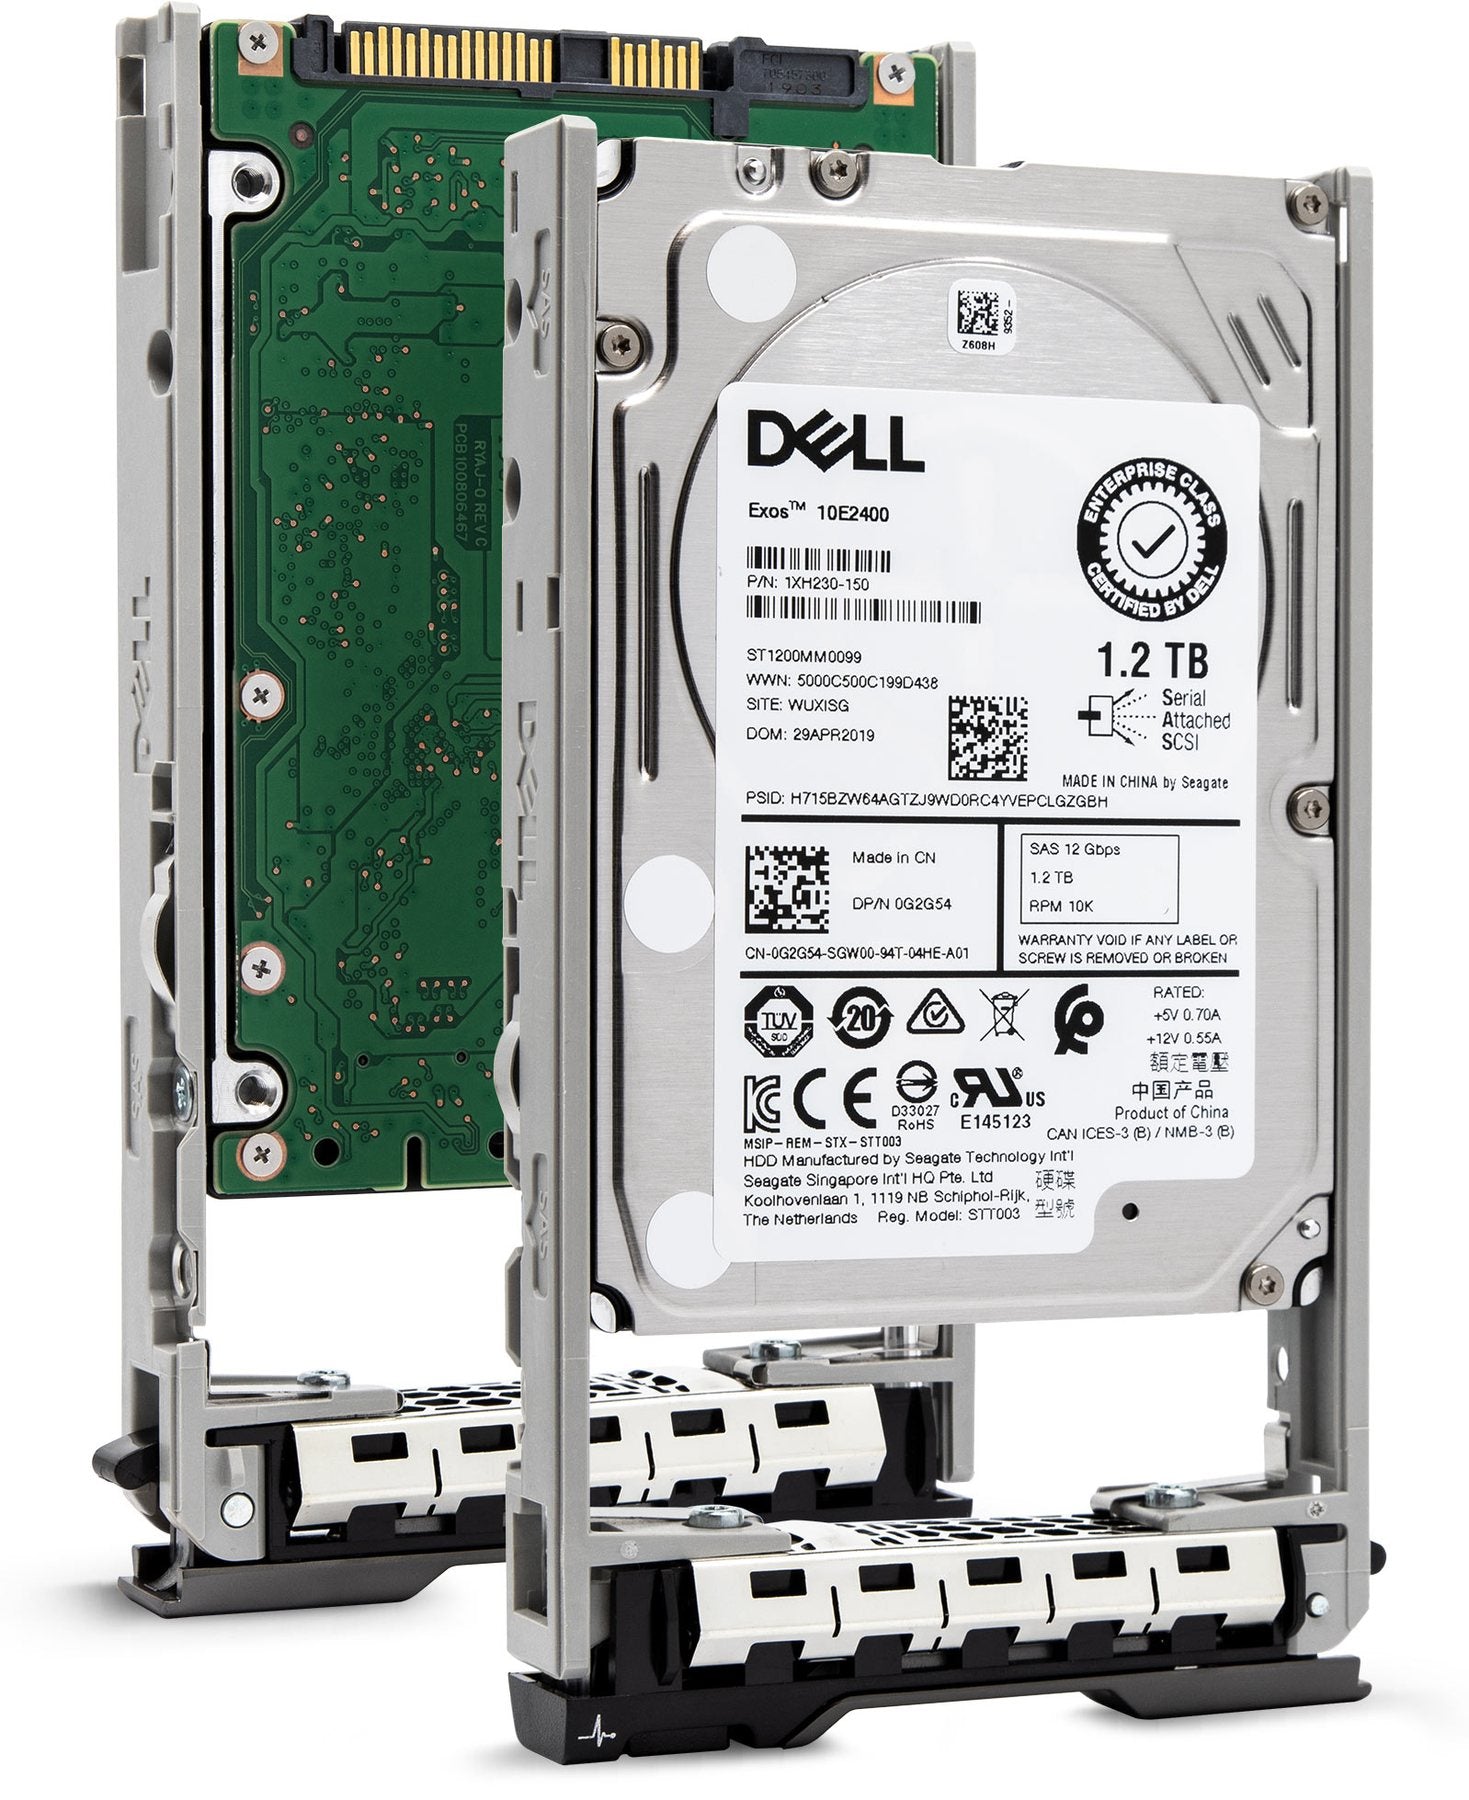 Dell G13 19FP0 1.2TB 10K RPM SAS 12Gb/s 512n 2.5" Manufacturer Recertified HDD